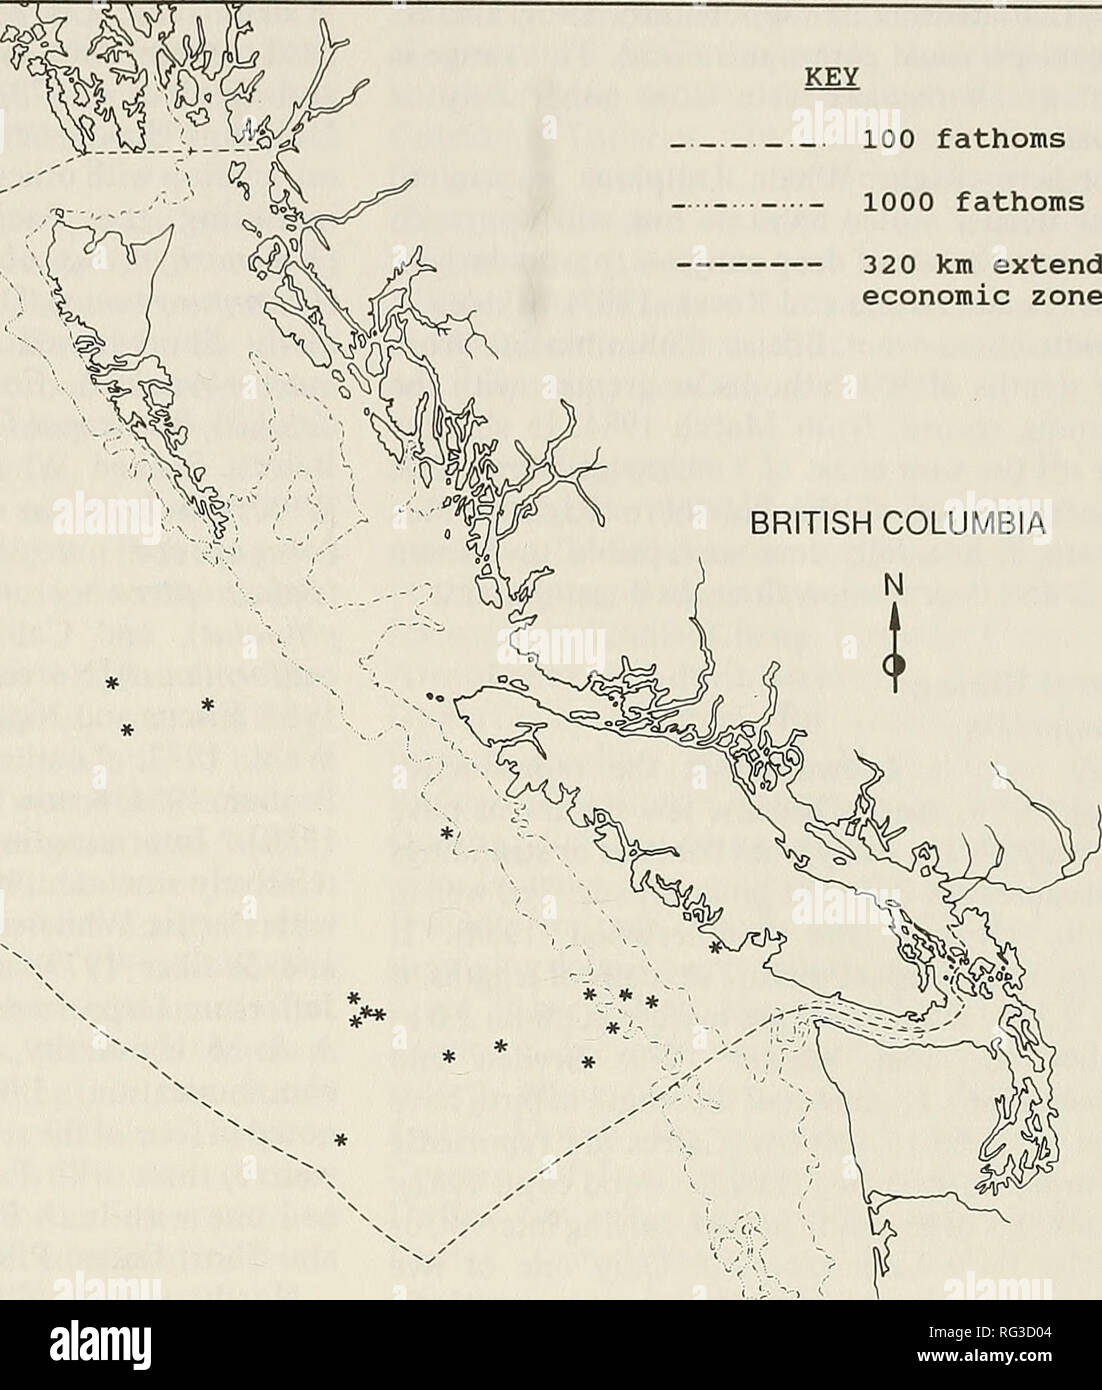 . The Canadian field-naturalist. 1991 Baird and Stacey: Status of the Northern Right Whale Dolphin 247 52°N- 48°N 100 fathoms 1000 fathoms 320 km extended economic zone BRITISH COLUMBIA N. 134°W 126°W Figure 4. Records of the Northern Right Whale Dolphin in the Canadian 320 km (200 mi) extended economic zone. individuals, but Leatherwood and Walker (1979) gave a tentative estimate of 17 800 individuals for a 20 000 square mile area off southern California. No recent estimate of total population size exists, but Northern Right Whale Dolphins appear to be among the most abundant of the oceanic d Stock Photo